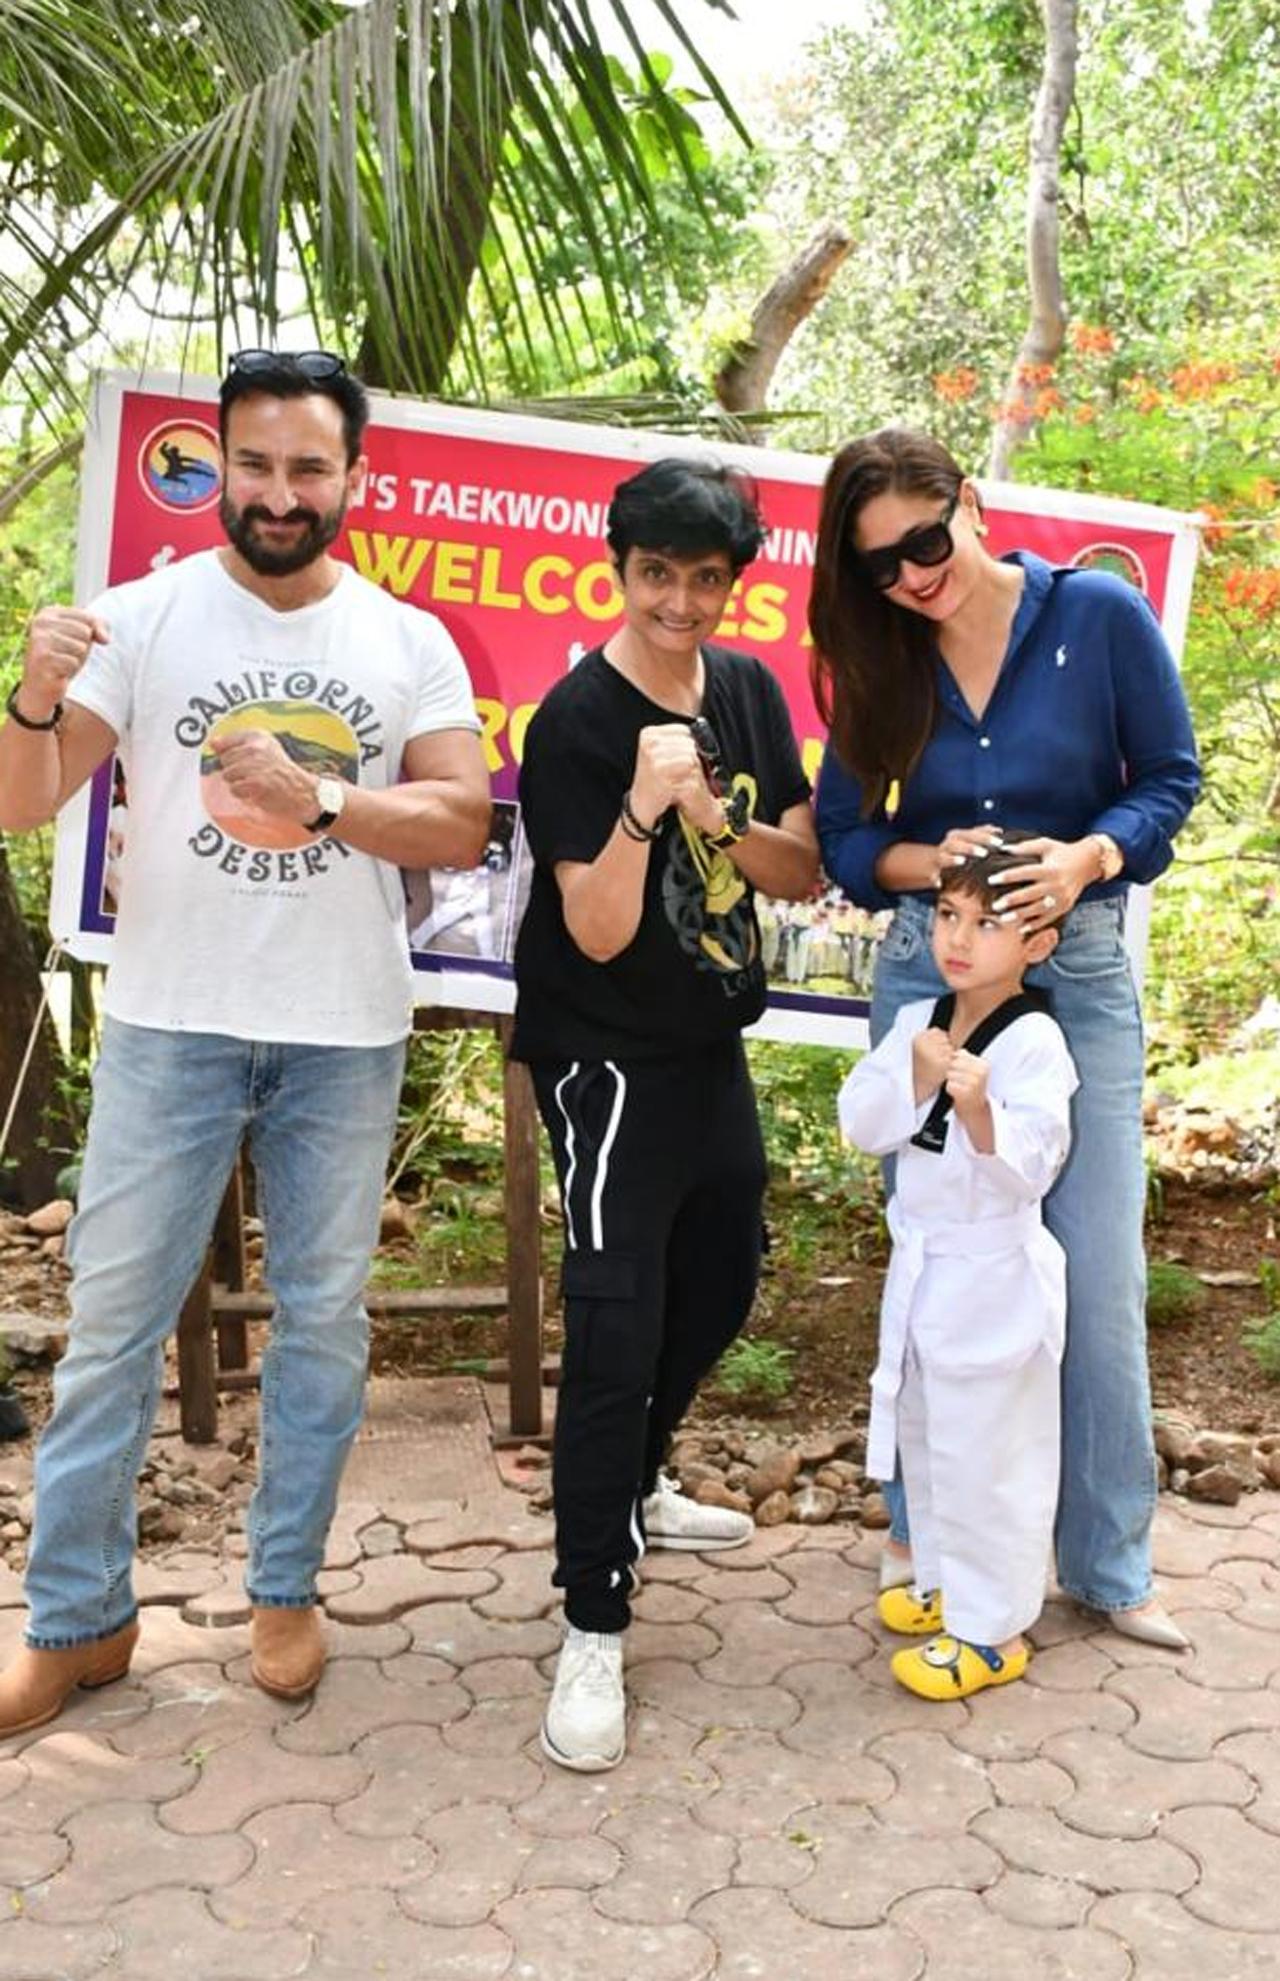 Kareena Kapoor Khan and Saif Ali Khan's son Taimur turned five on December 20 last year. Marking the special occasion, mommy Kareena shared an unseen video of Taimur from his toddler days. In the clip, Taimur can be seen taking his first steps. Alongside the video, Kareena penned a heartwarming note for Taimur.